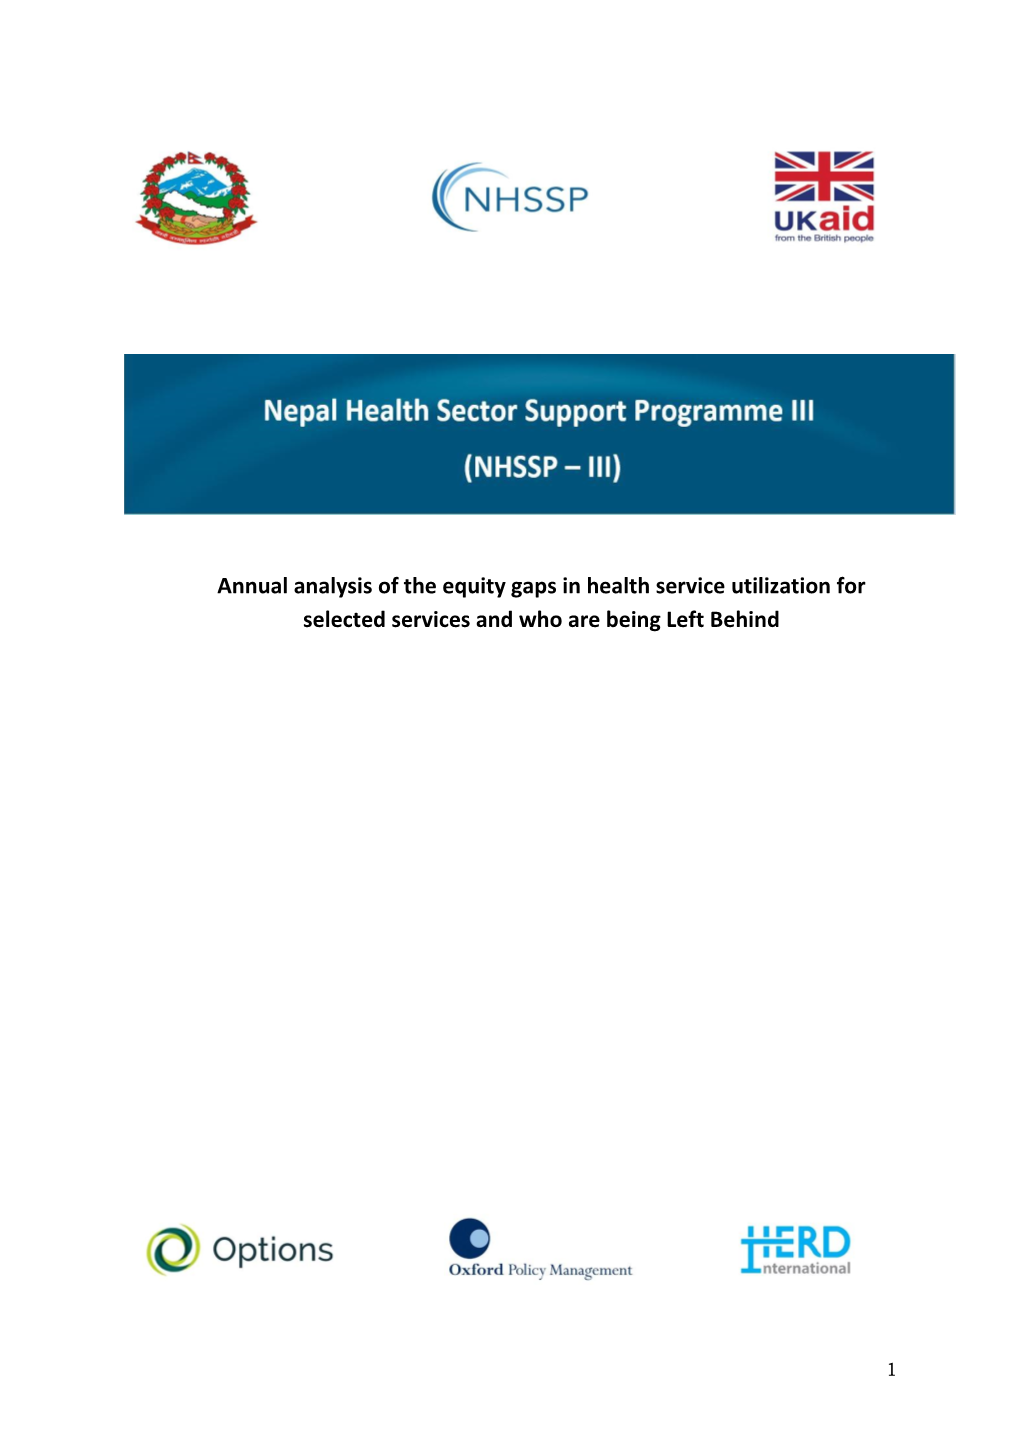 Annual Analysis of the Equity Gaps in Health Service Utilization for Selected Services and Who Are Being Left Behind